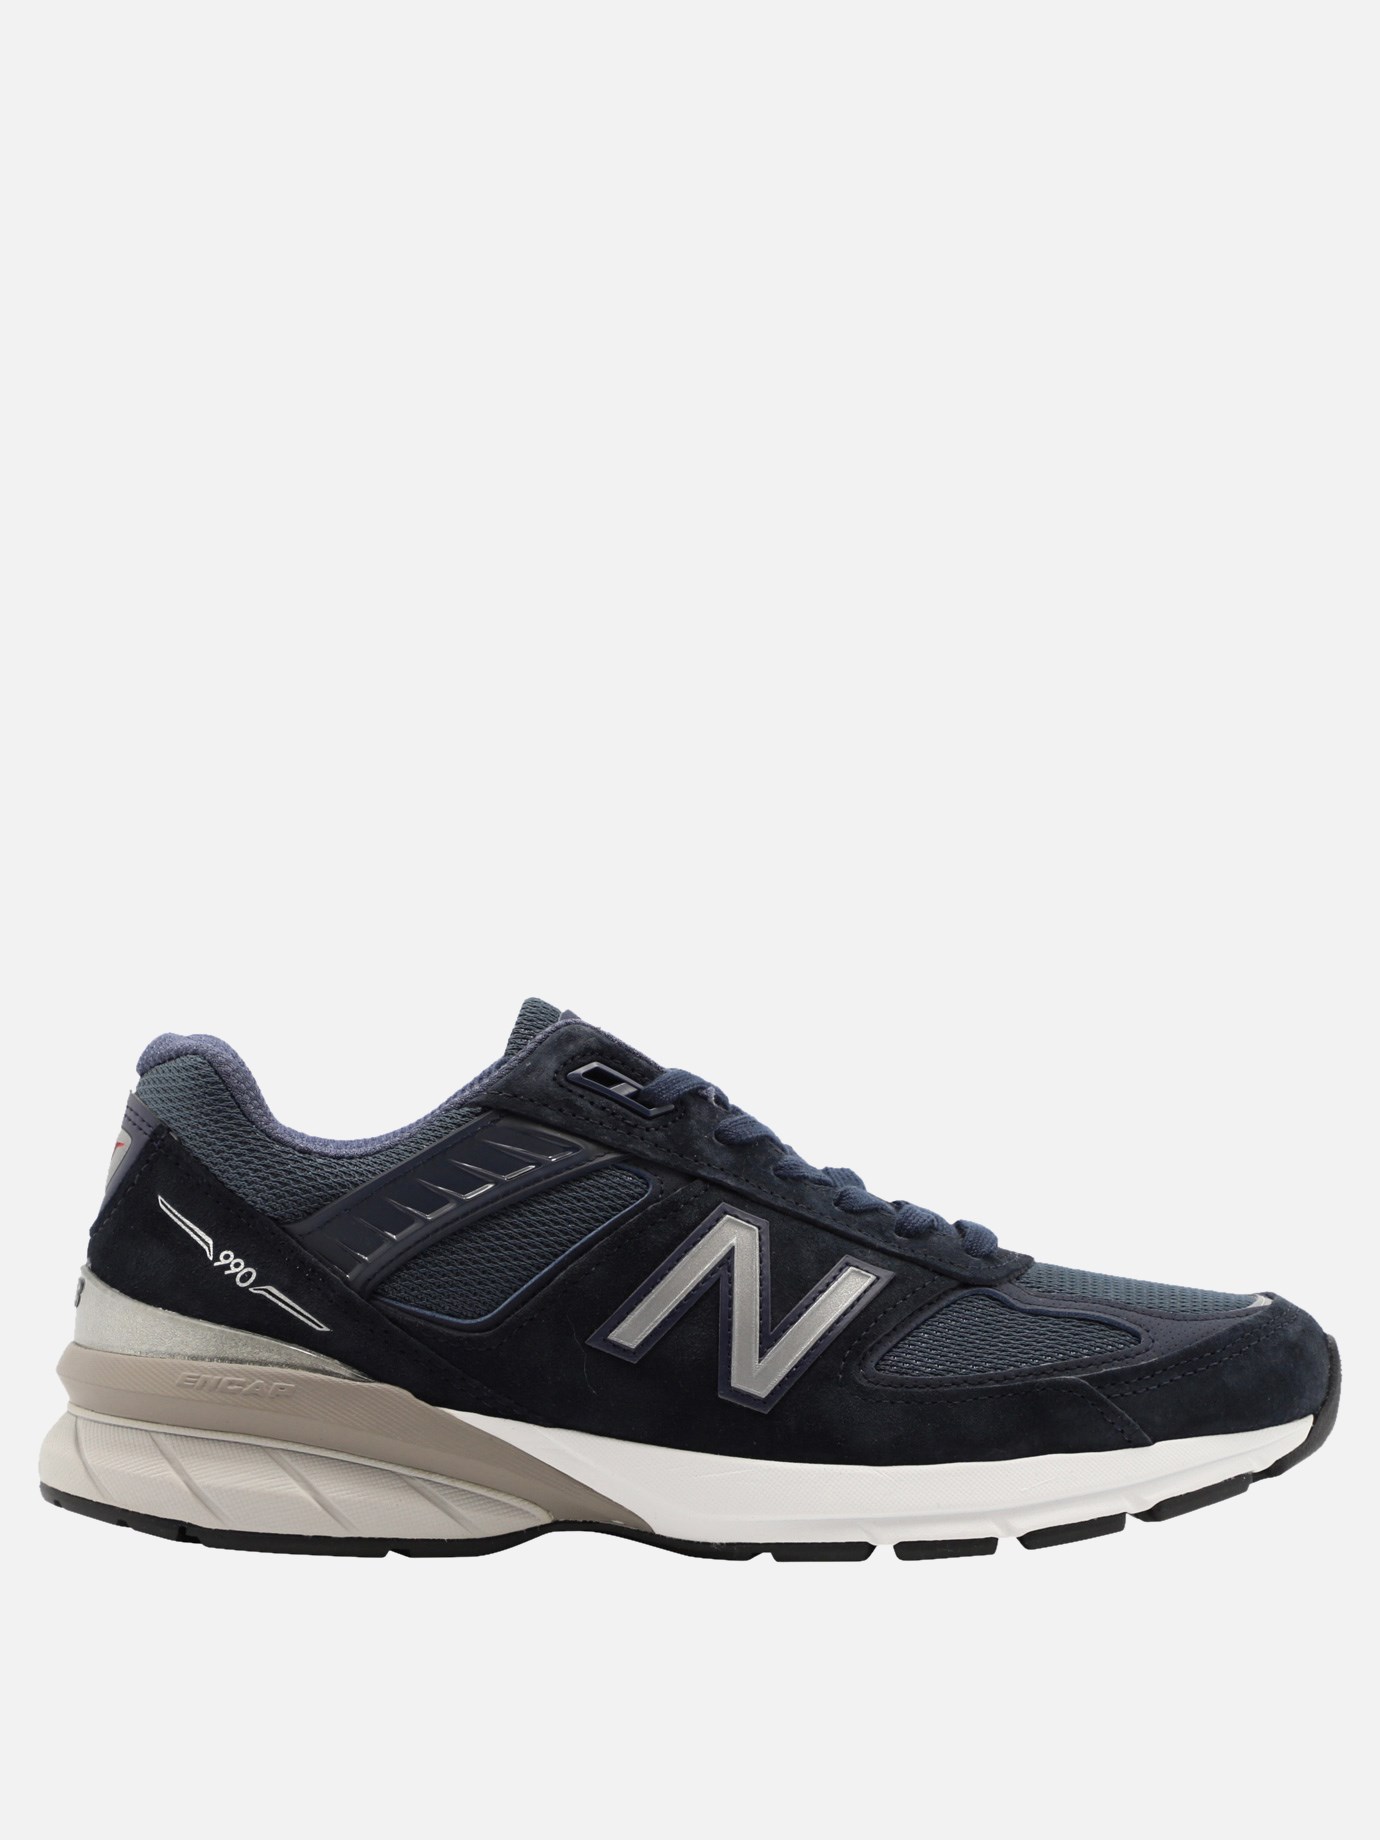  990V5  sneakersby New Balance - 4